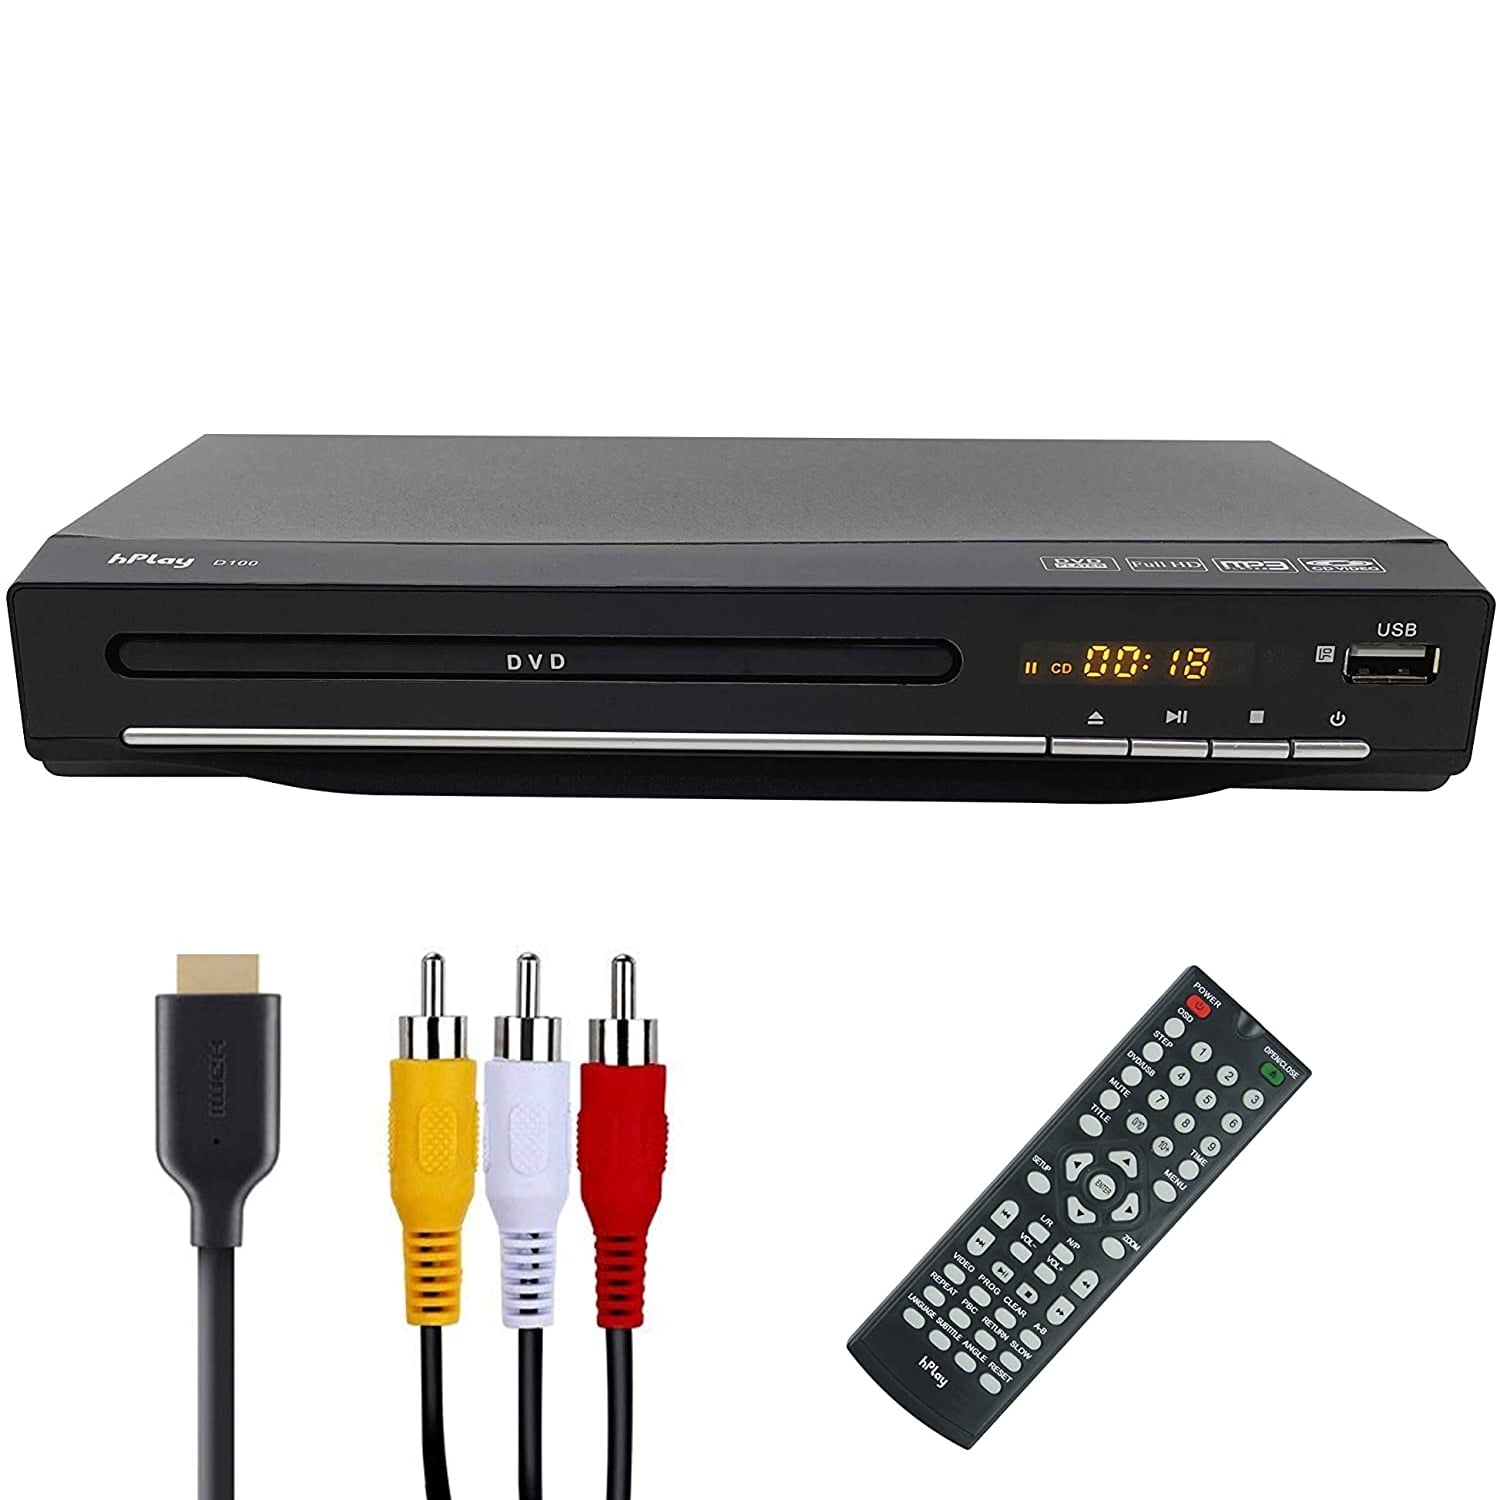 beginnen Golven Politiek hPlay Compact Desktop DVD Media Player for TV, Region Free, HDMI & RCA  Output, USB Port, Built in PAL/NTSC, RCA(AV) Cable, HDMI Cable Included,  Top Metal Casing for Durability - Walmart.com